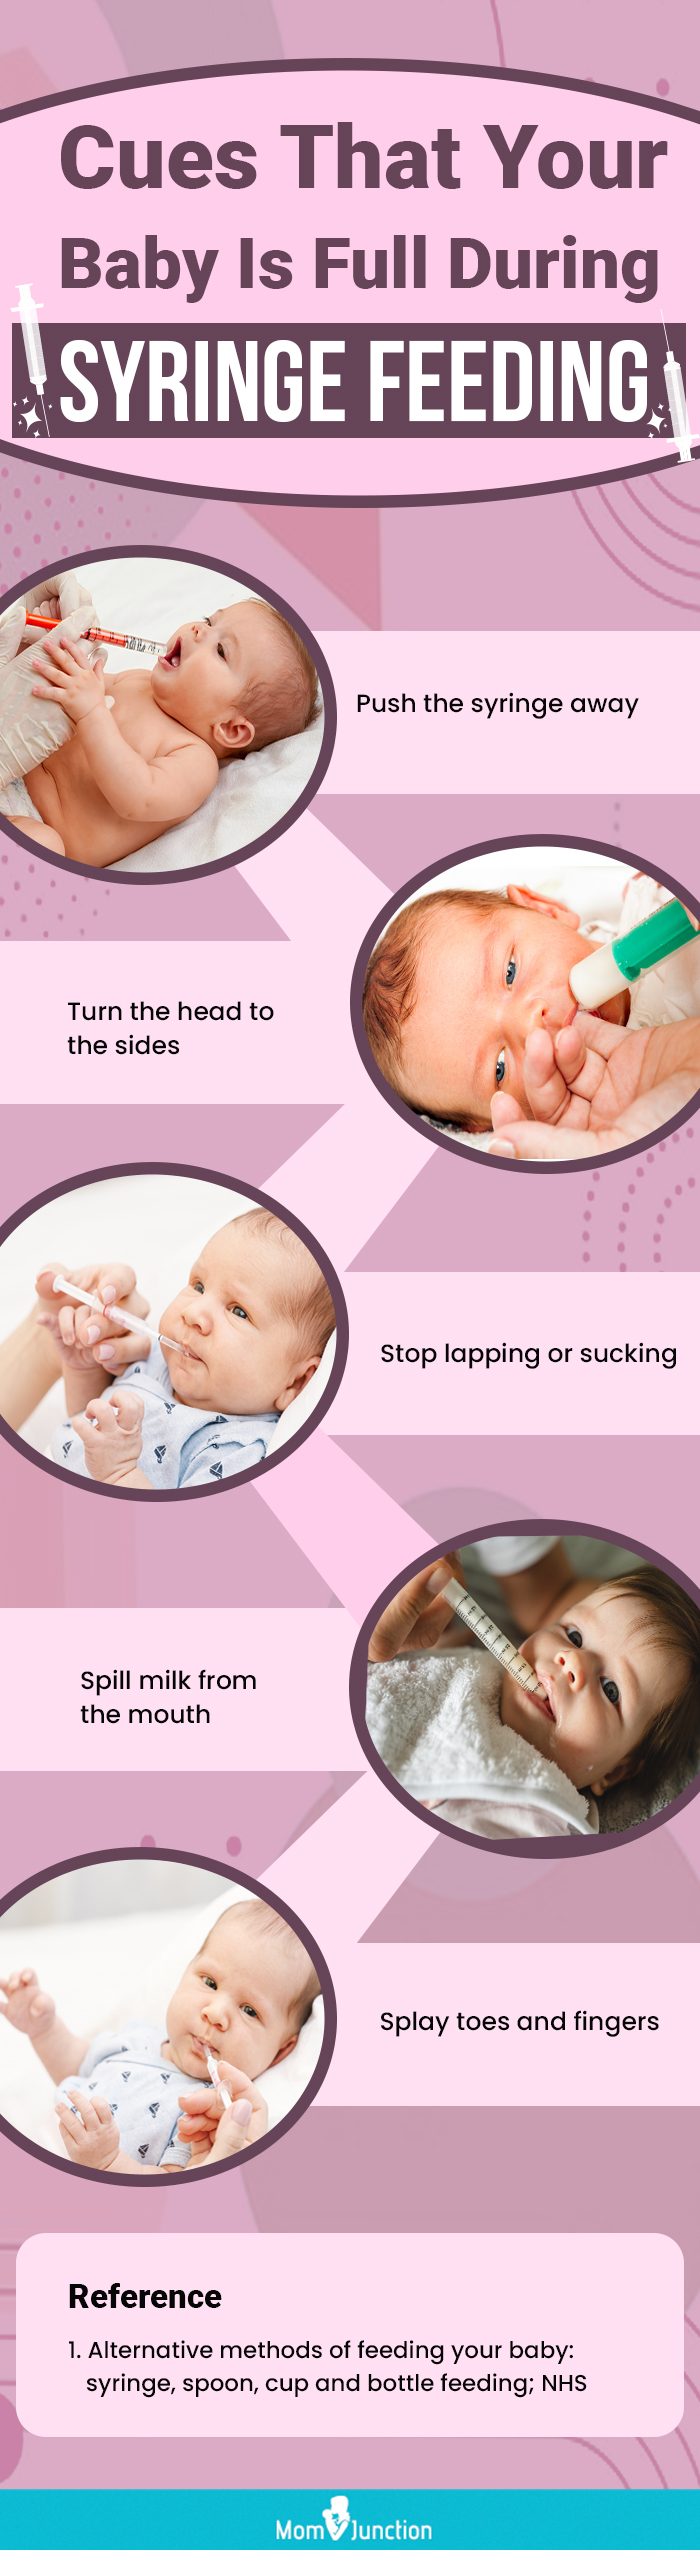 https://cdn2.momjunction.com/wp-content/uploads/2022/11/Cues-That-Your-Baby-Is-Full-During-Syringe-Feeding.jpg